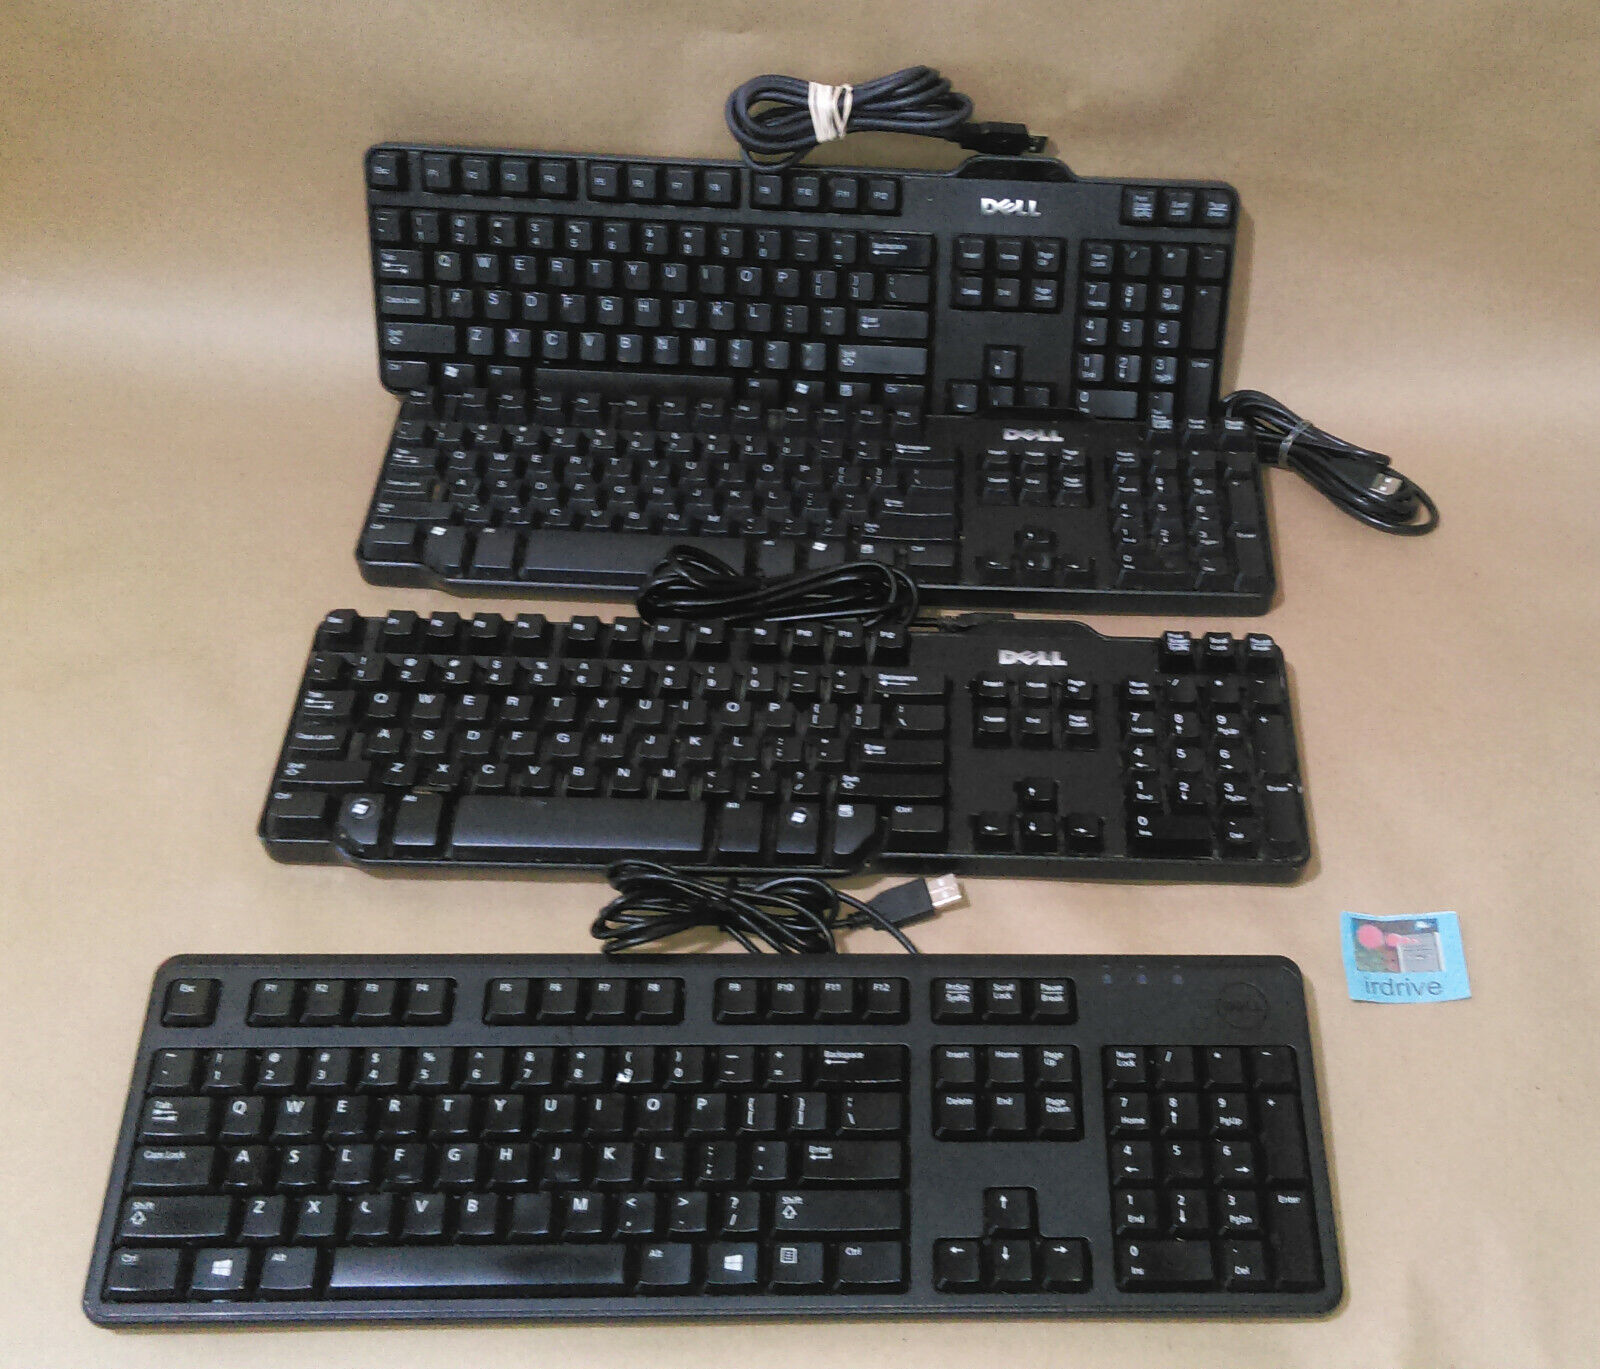 Wholesale Lot of 4pcs: Genuine Dell Black English USB Desktop PC Wired Keyboards